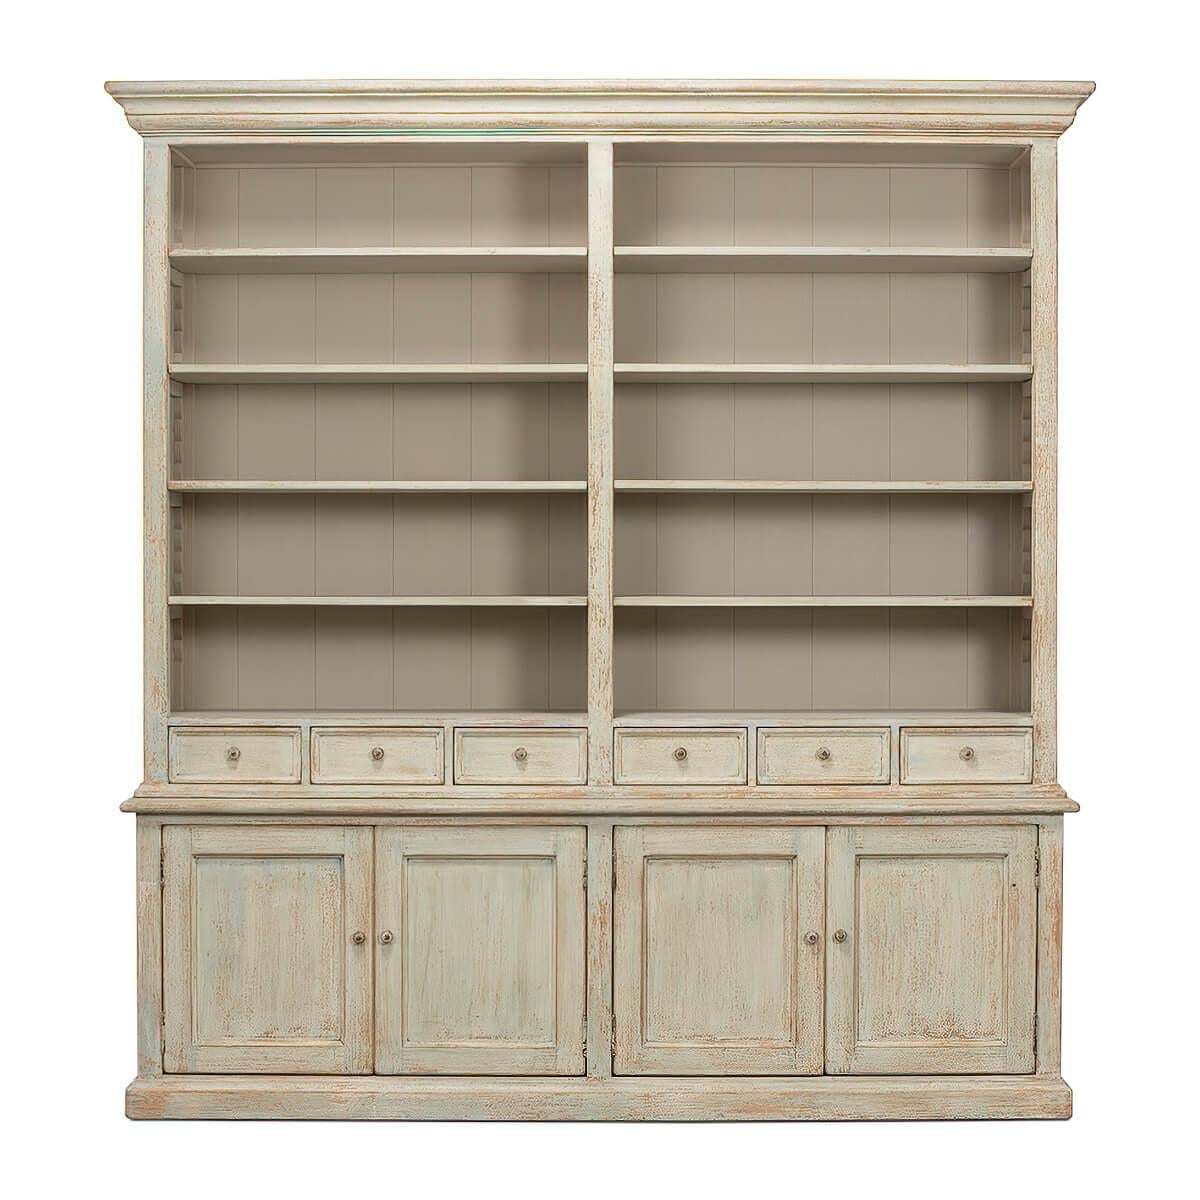 Traditional style Rustic painted bookcase with soft antique blue wash painted finish on reclaimed pine. With a molded cornice, adjustable shelves, six mid drawers and four cabinet doors below raised on a square plinth base.

Dimensions: 93